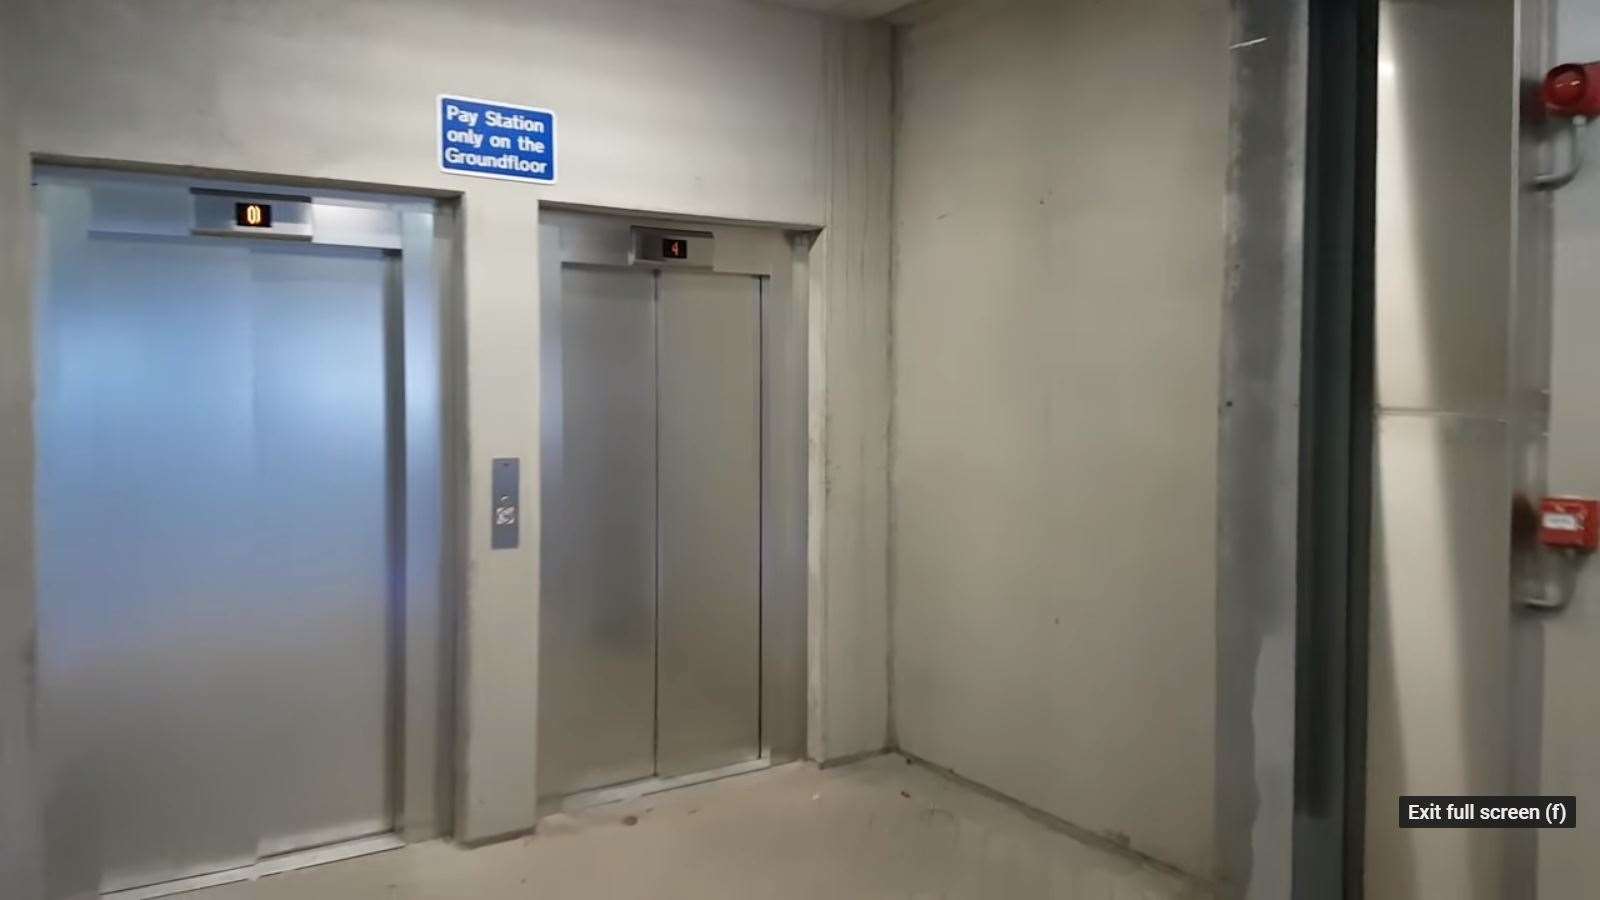 The mystery camerman takes one of the two lifts at Sittingbourne's new multi-storey car park. Picture: Morthren (14031932)